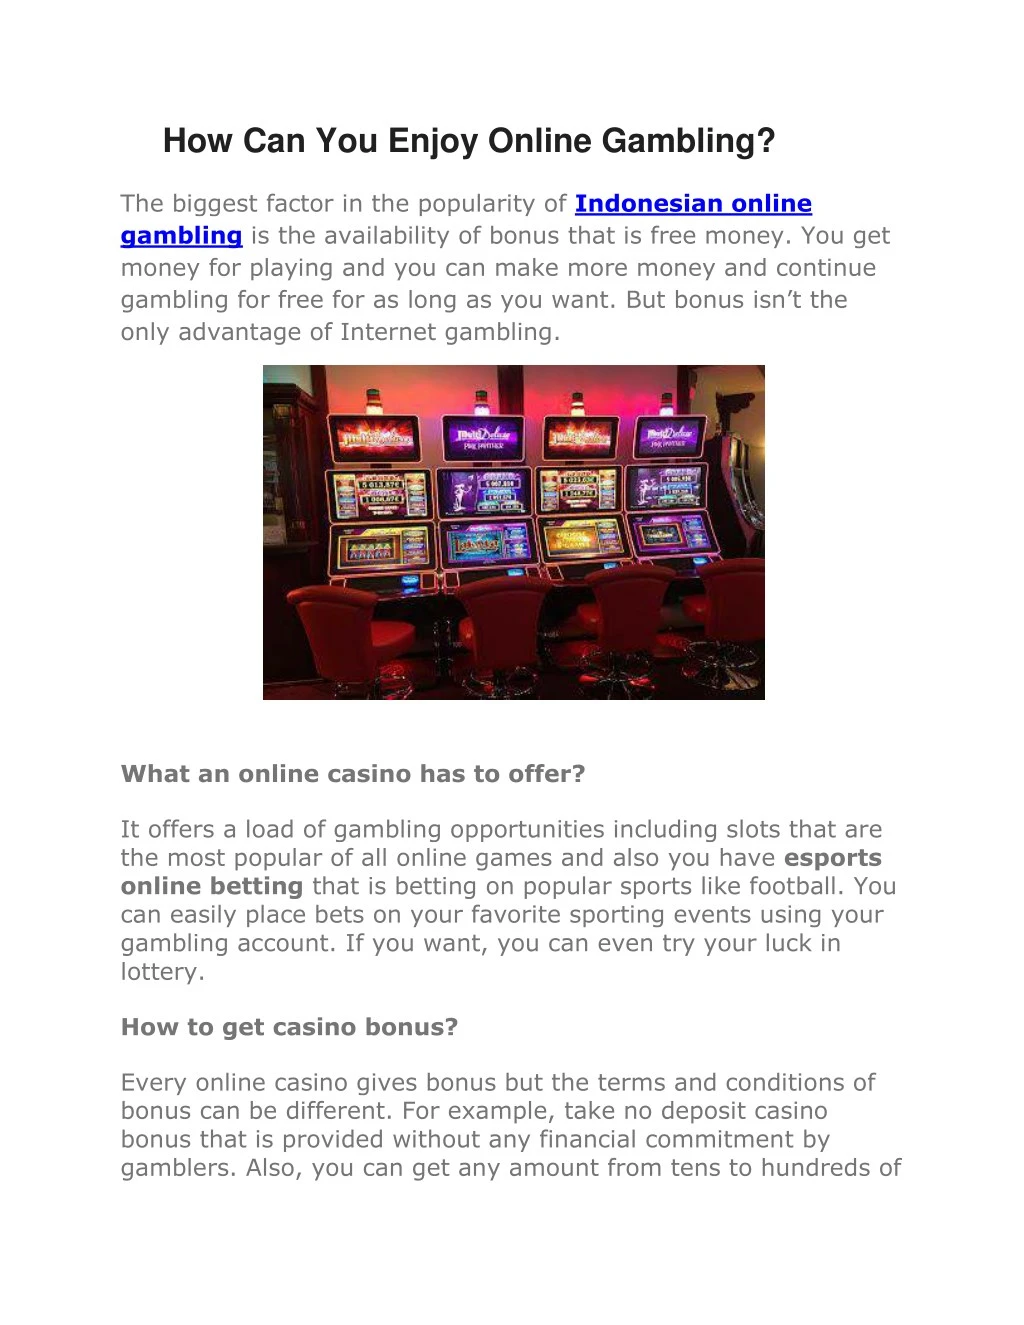 how can you enjoy online gambling the biggest